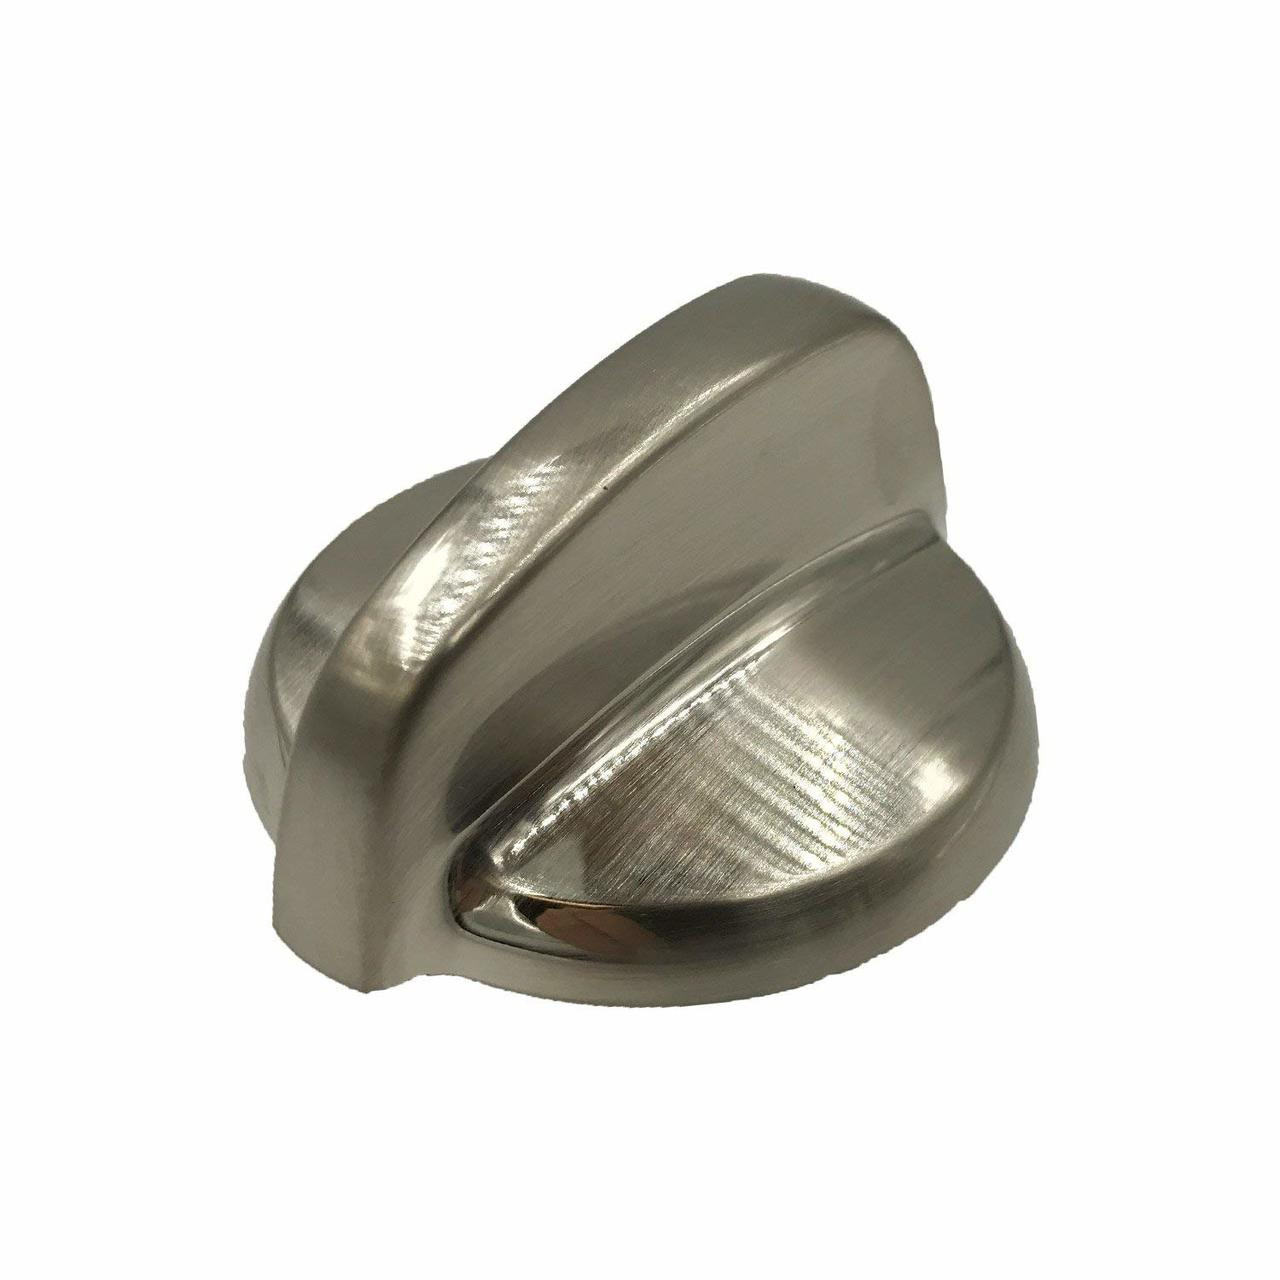 Wb03t10325 Cooktop Knob For Ge Range